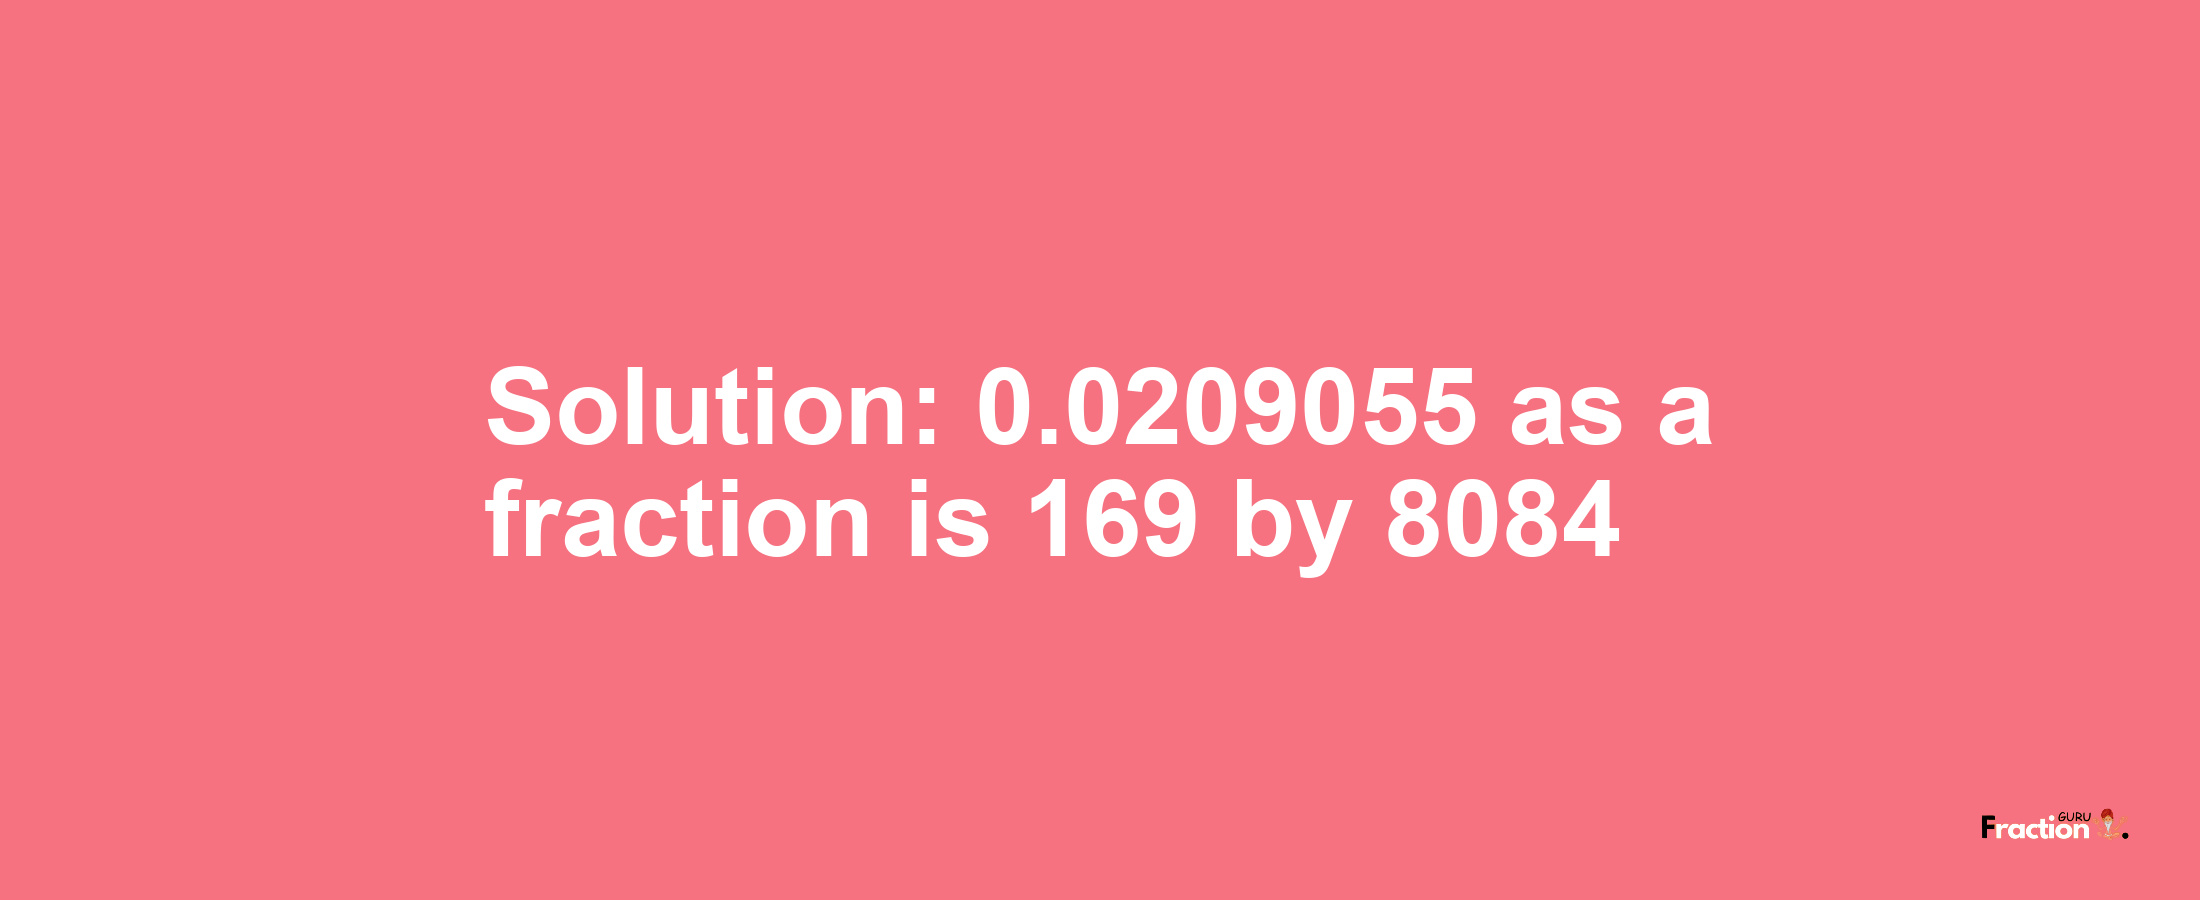 Solution:0.0209055 as a fraction is 169/8084